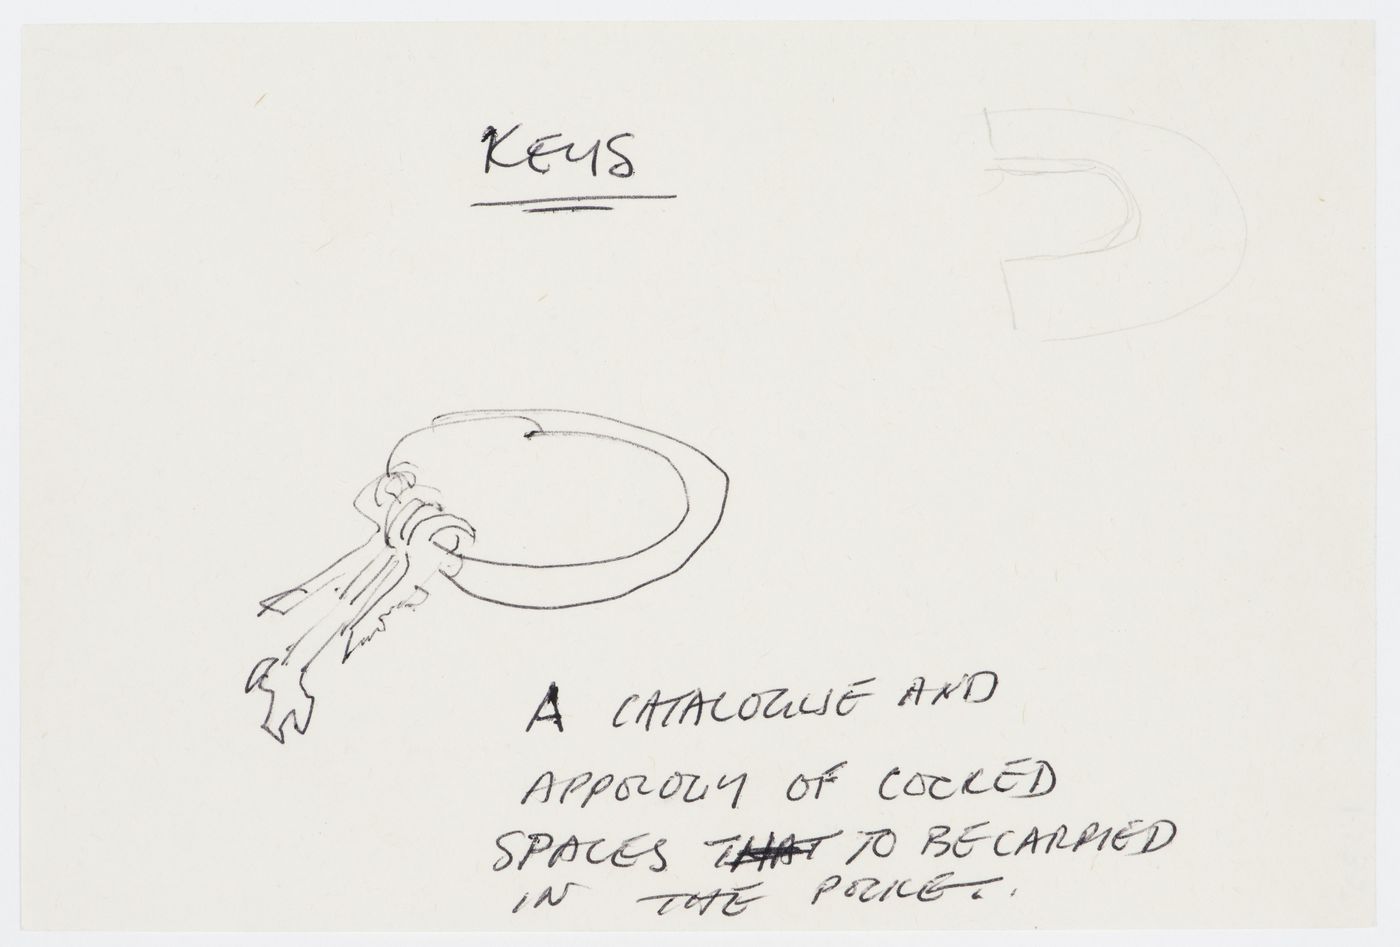 Keys / A catalogue and appology of locked spaces to be carried in the pocket